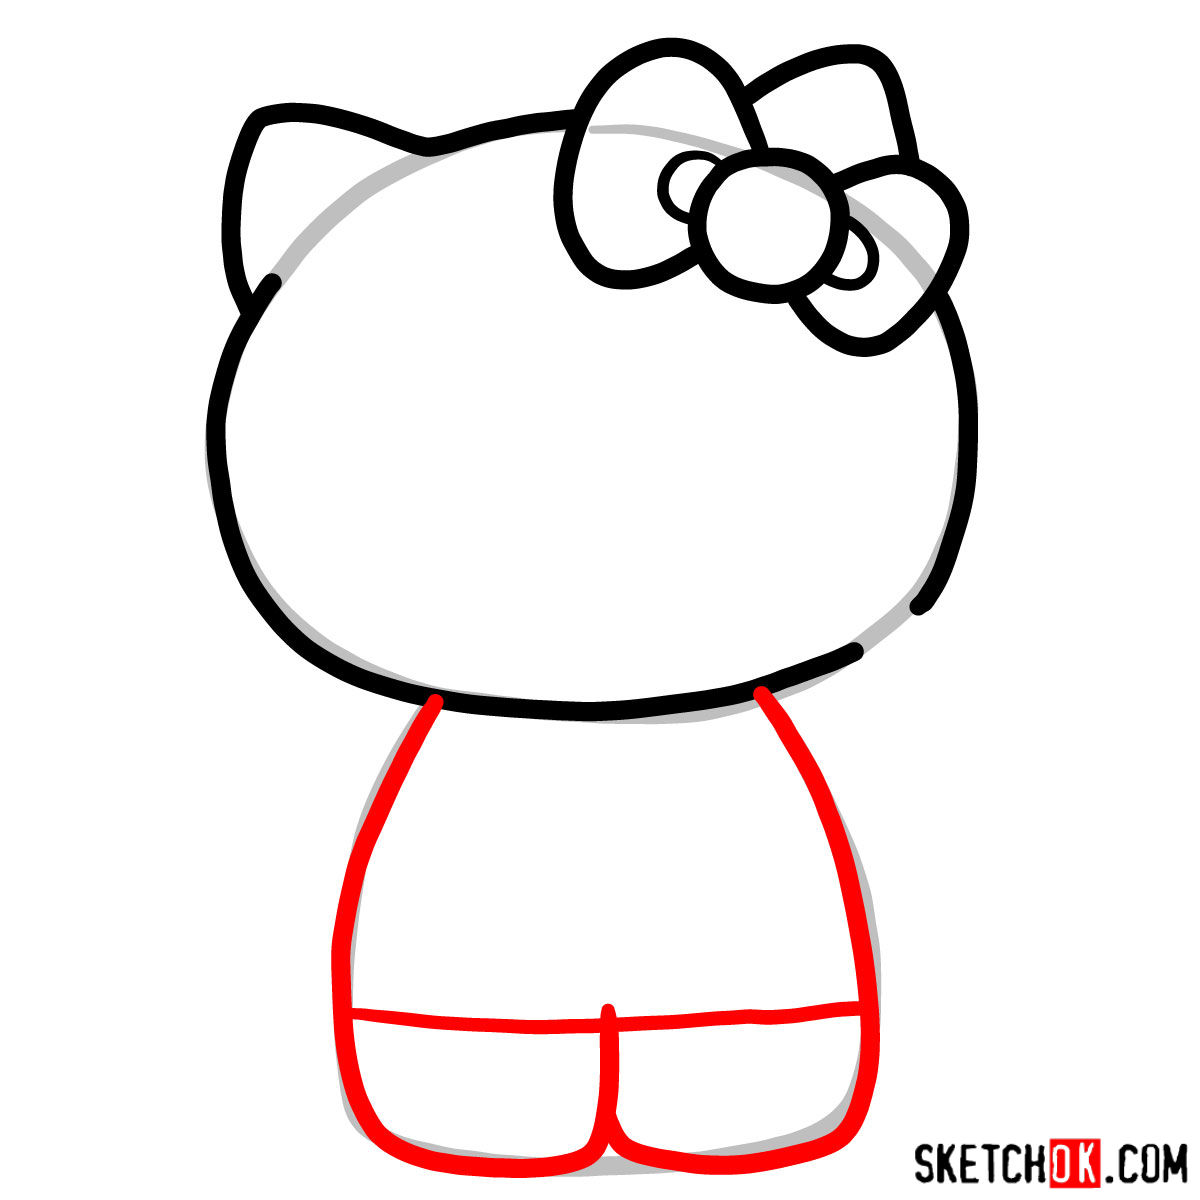 How to draw Hello Kitty - step 04